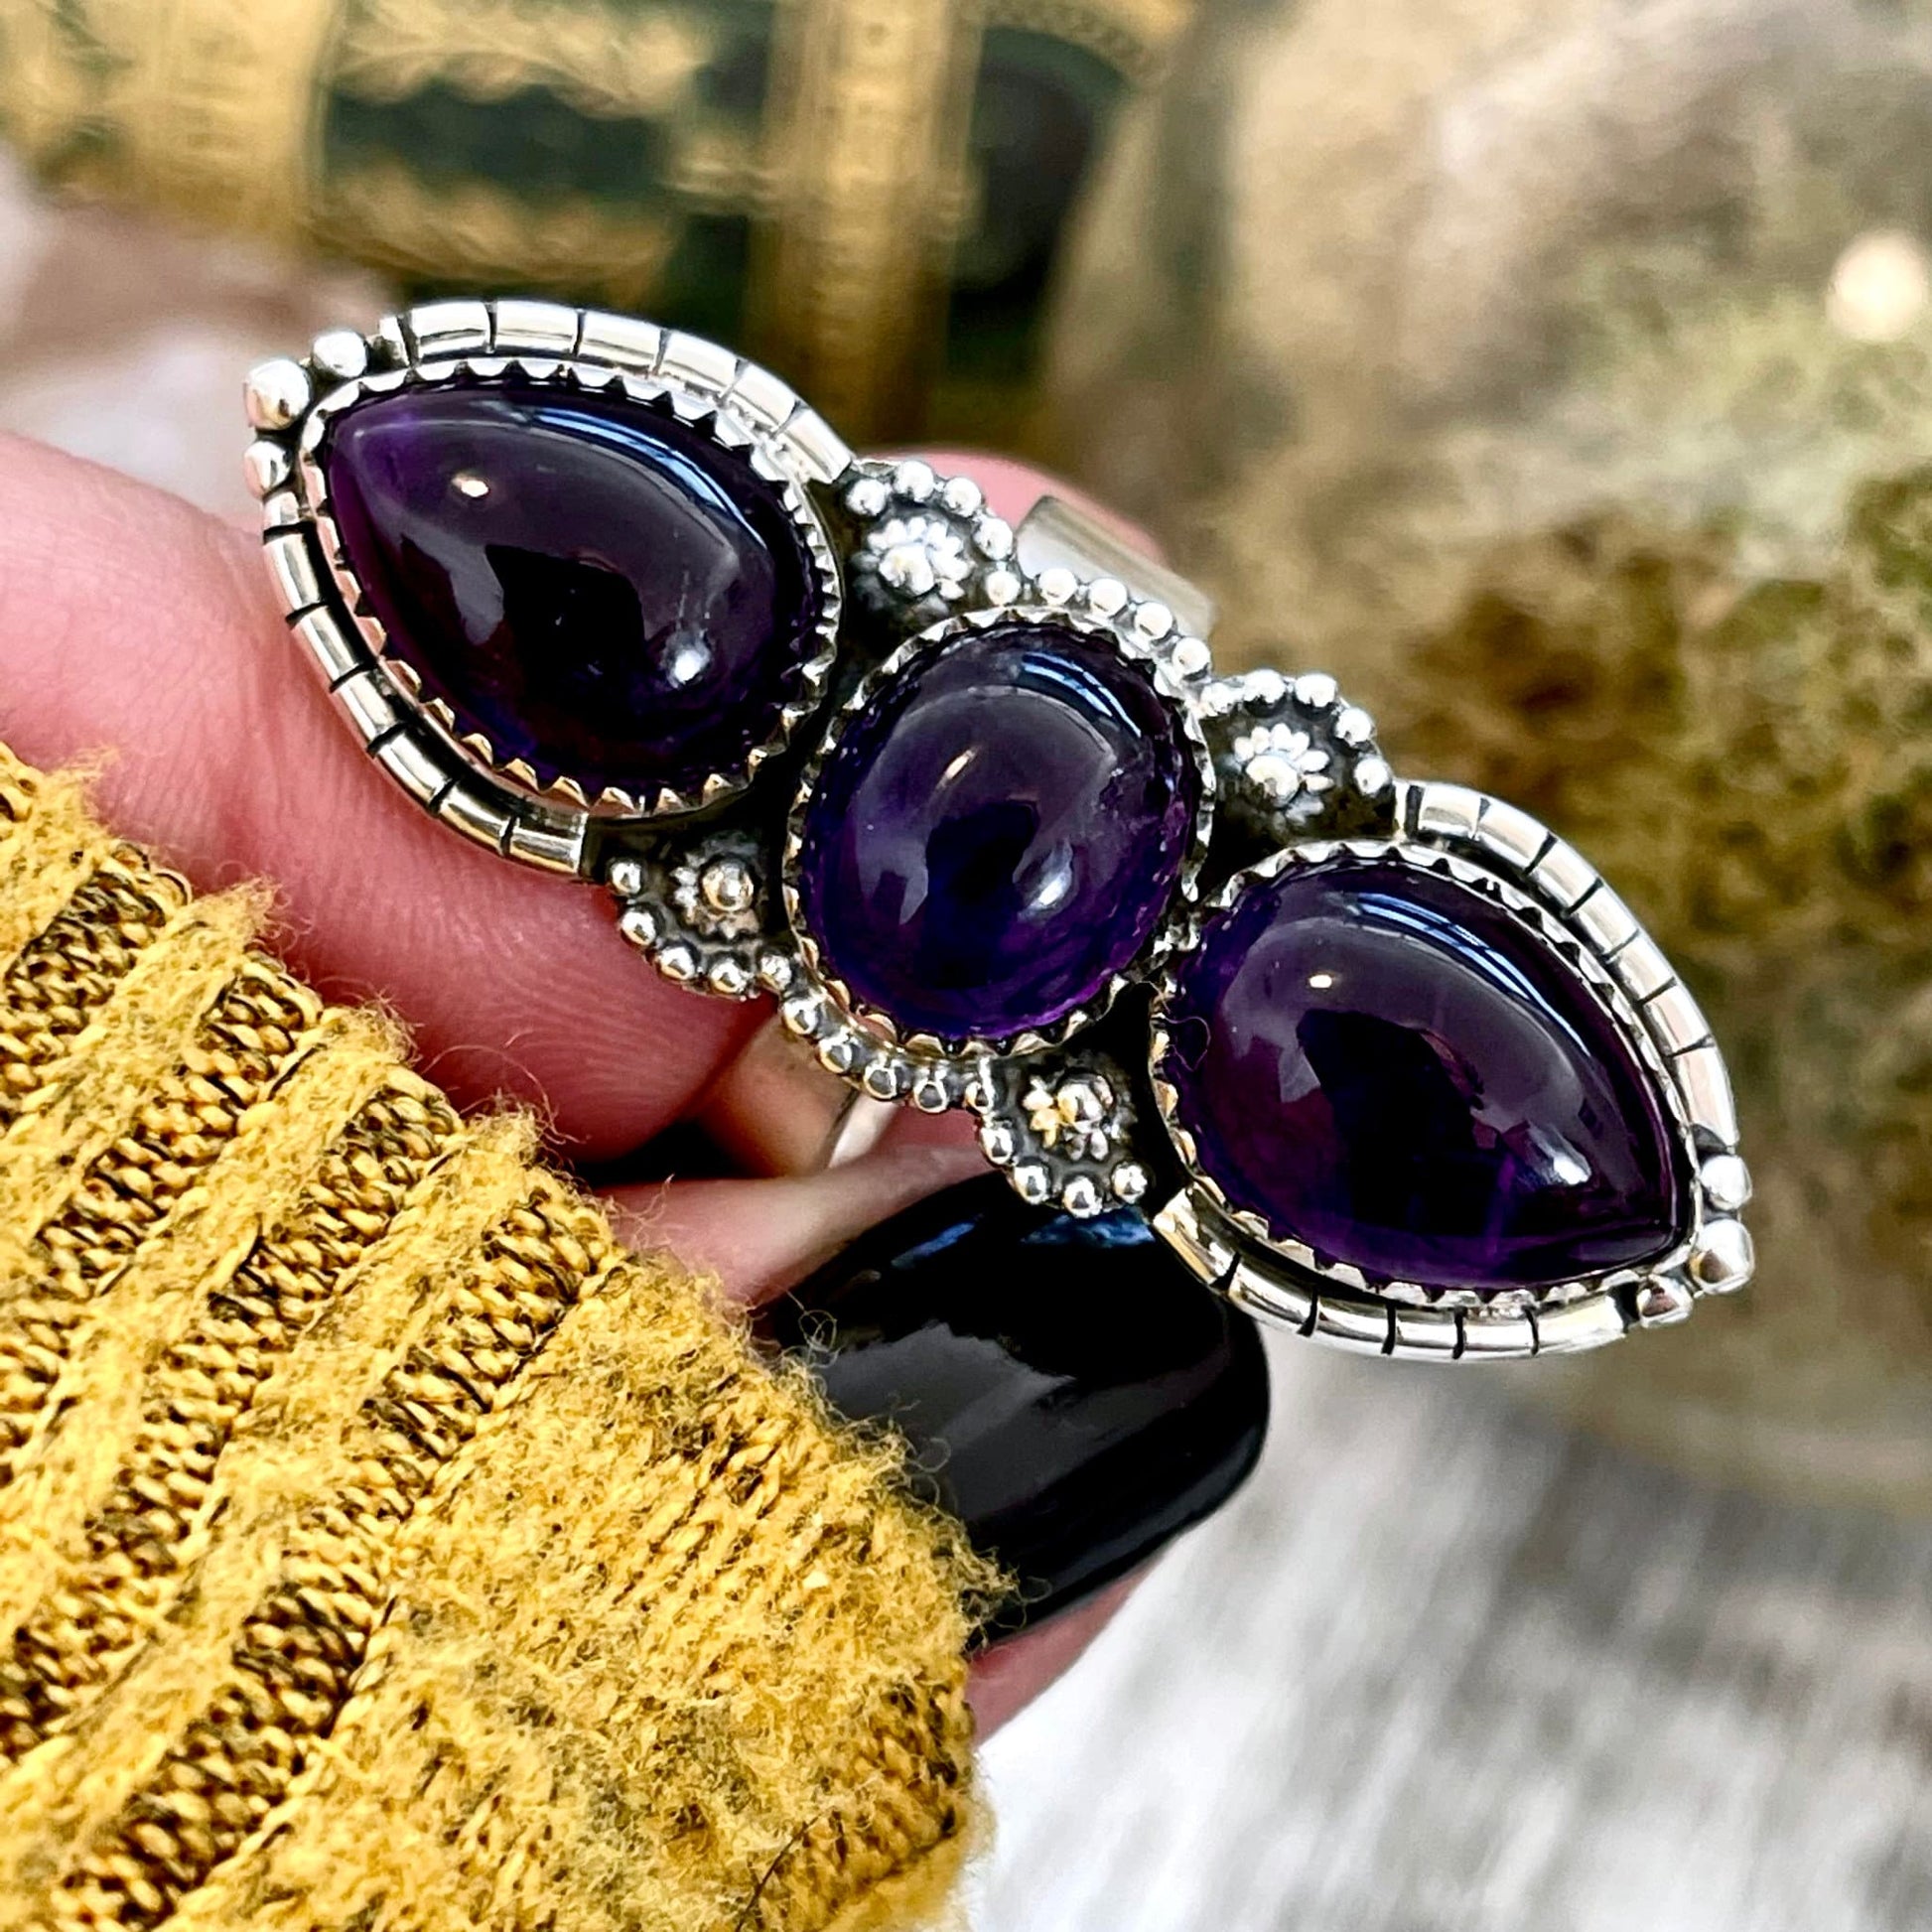 3 Stone Ring, Adjustable Ring, Amethyst Ring, Big Crystal Ring, Big Stone Ring, Bohemian Ring, Boho Jewelry, Boho Ring, Etsy ID: 1333720027, Festival Jewelry, Foxlark- Rings, Gift For Woman, Jewelry, Purple Amethyst, Rings, Statement Rings, Three Stone, W